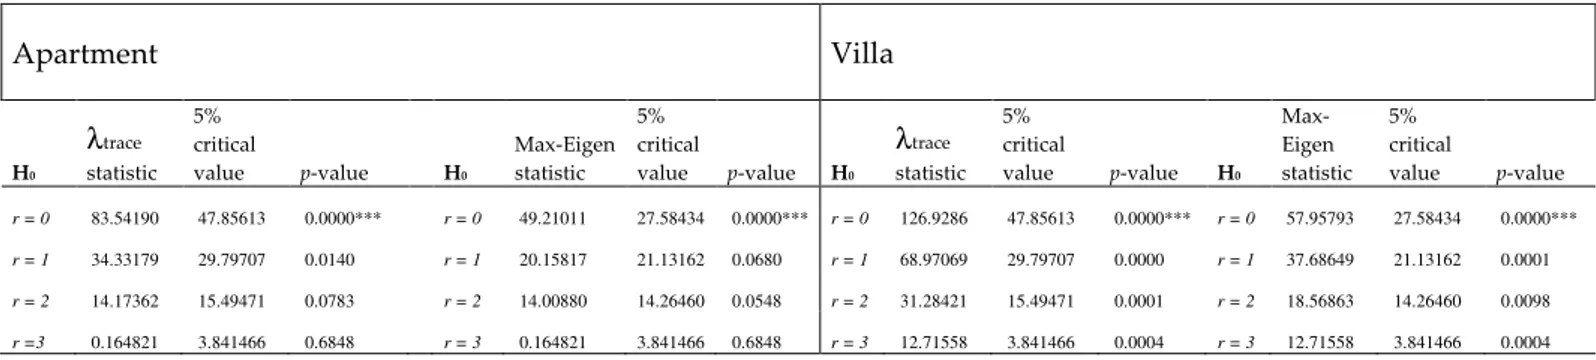 Table IV. Johansen co-integration results: a four-variable, seven-lag system for apartment  time series and villa time series, respectively 